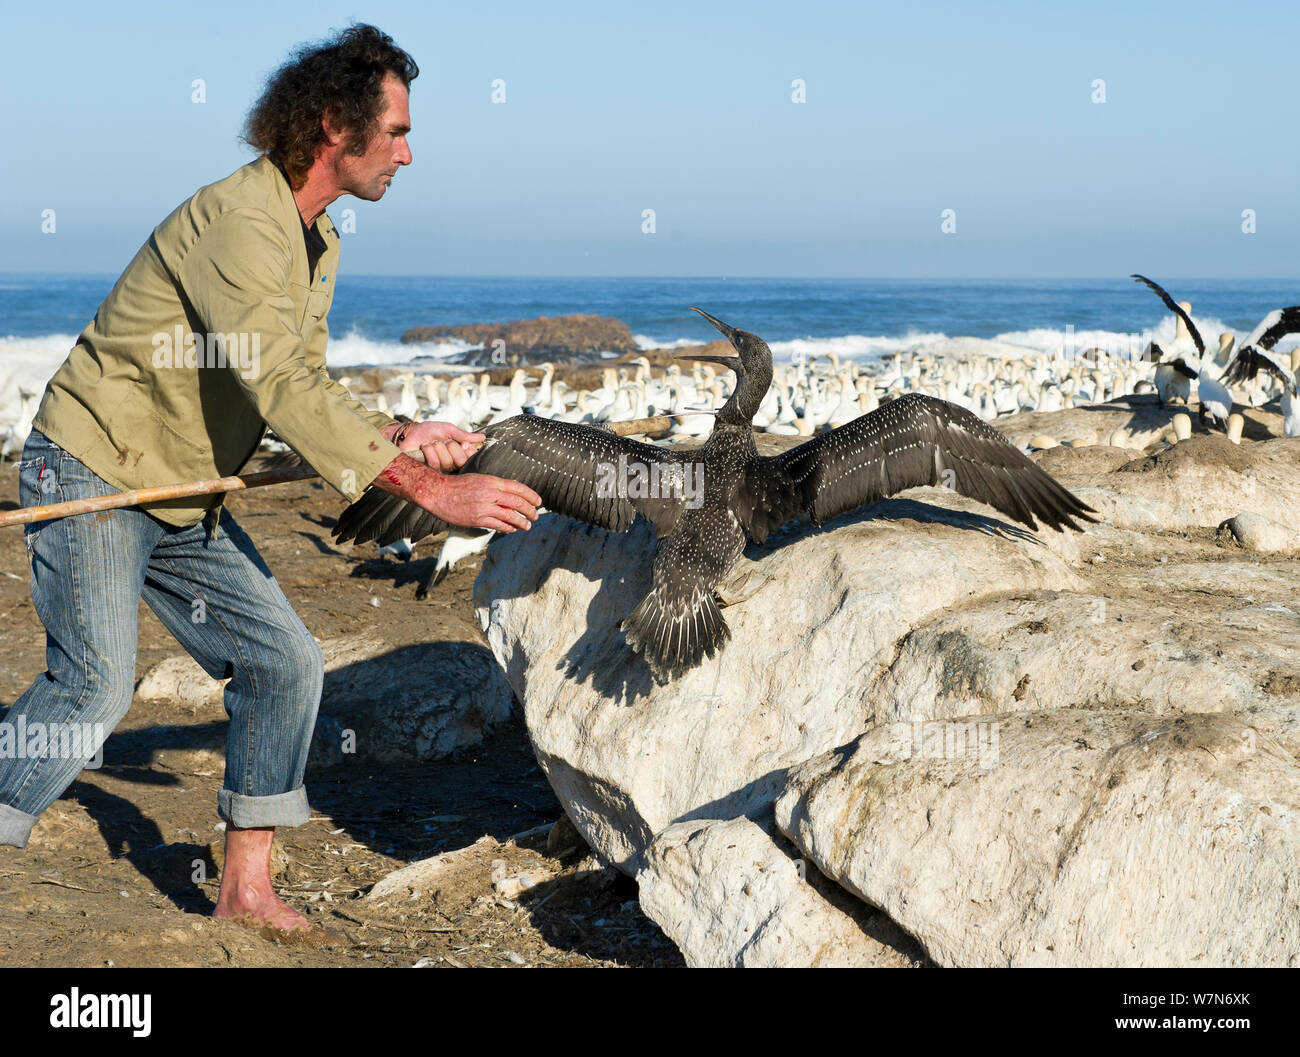 Yves Chesselet (Cape Nature) captures Cape gannet juvenile (Morus capensis) from the colony on Bird Island, Lambert's Bay, South Africa, 2012. The birds were abandoned by their parents. After capture the gannets were sent to SANCCOB for hand rearing and release back in to the wild. Southern African Foundation for the Conservation of Coastal Birds (SANCCOB). Stock Photo